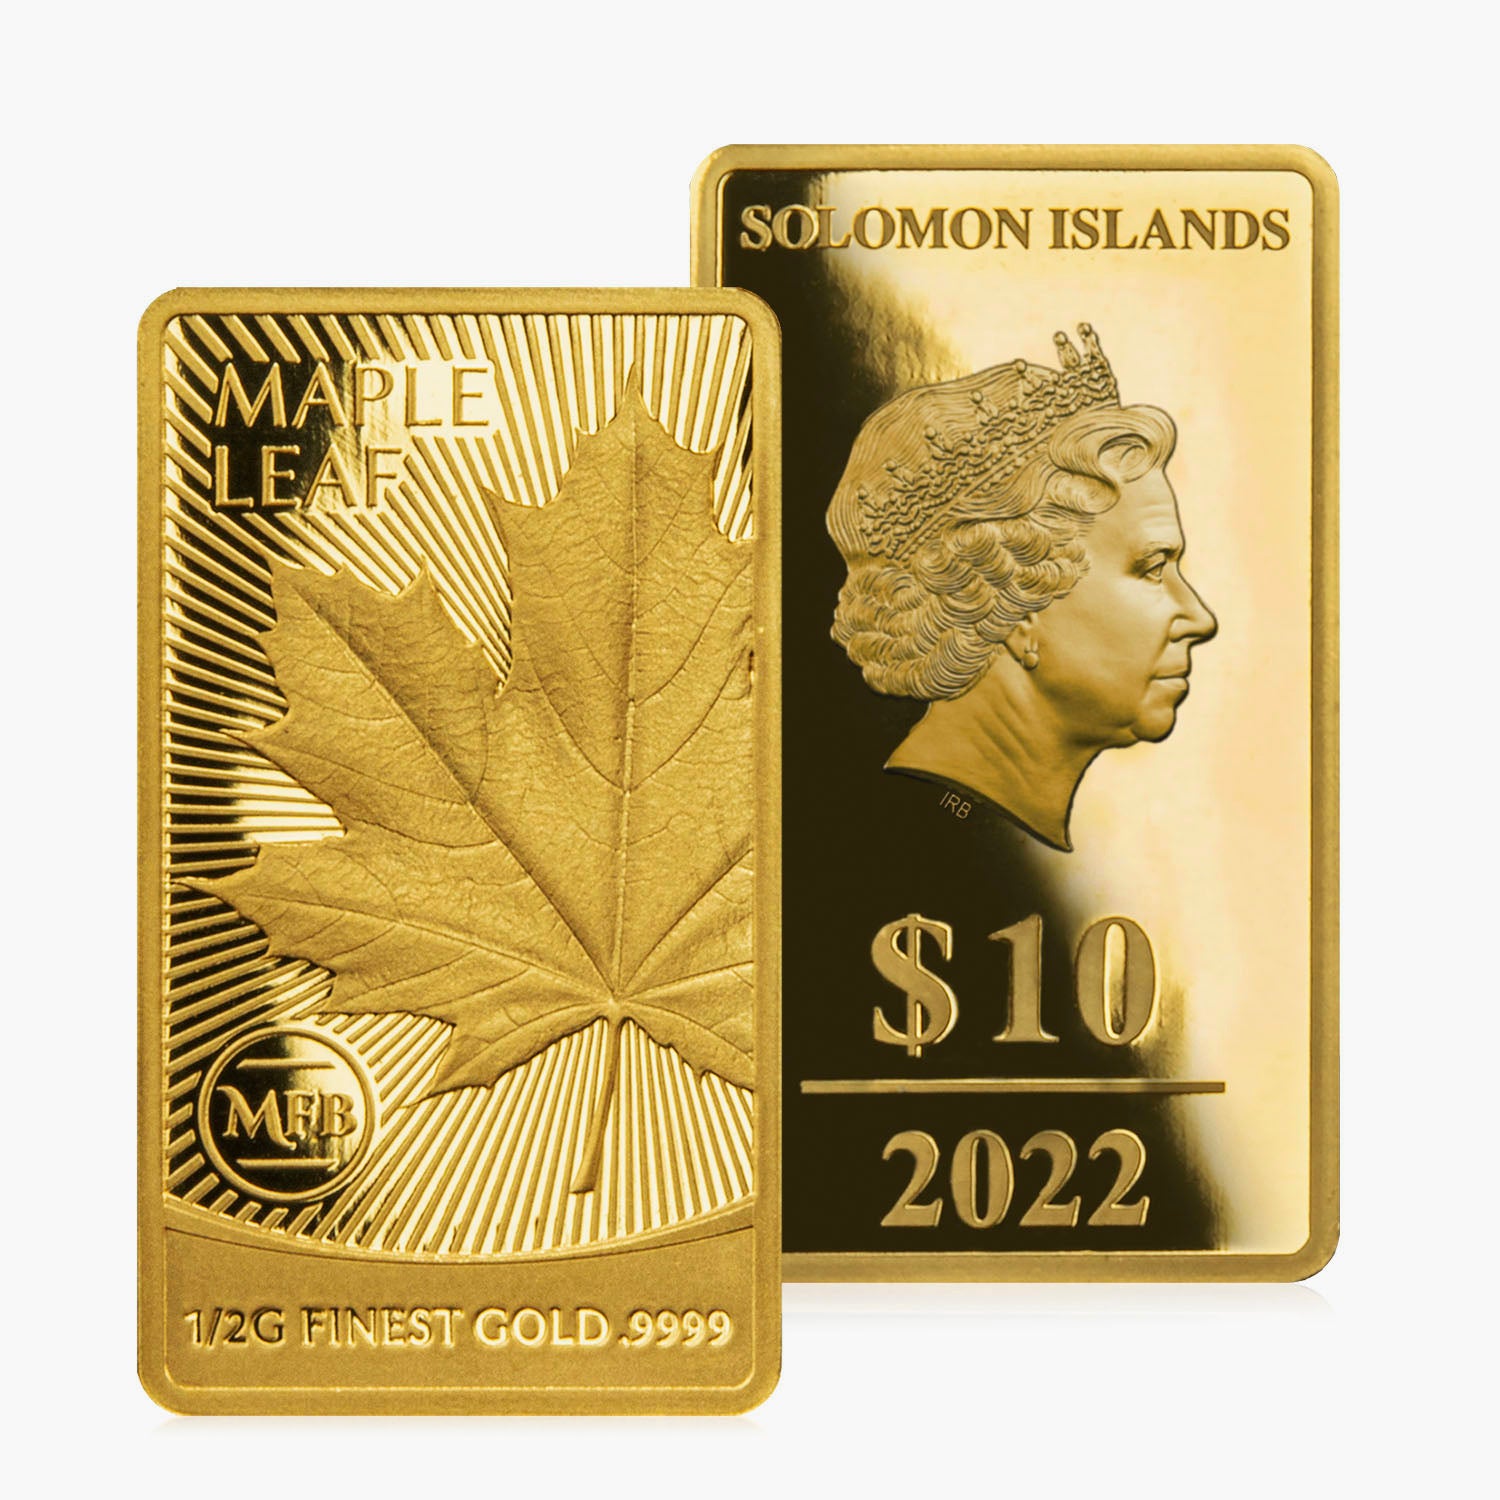 The World's Most Famous Solid Gold Bullion Coin Collection